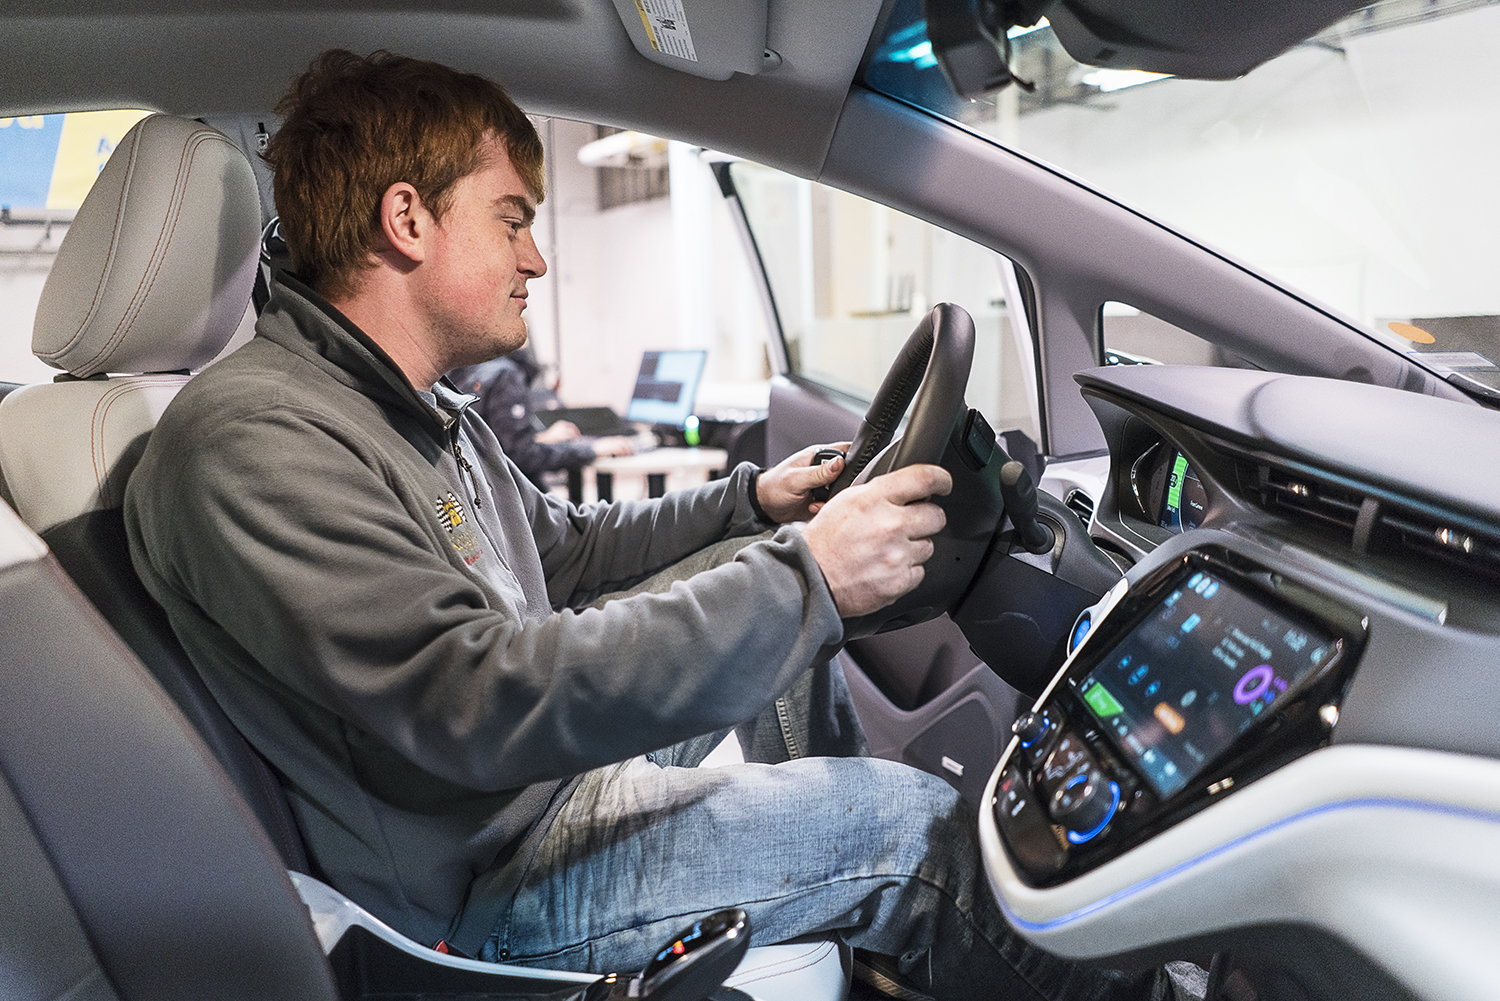 Flint, MI - Friday, November 10, 2017: Graduate student and student coordinator for the SAE/GM AutoDrive Competition, Alex Rath, 22, sits in the driver's seat of the new Chevrolet Bolt and surveys the driver information center as it is connected to a